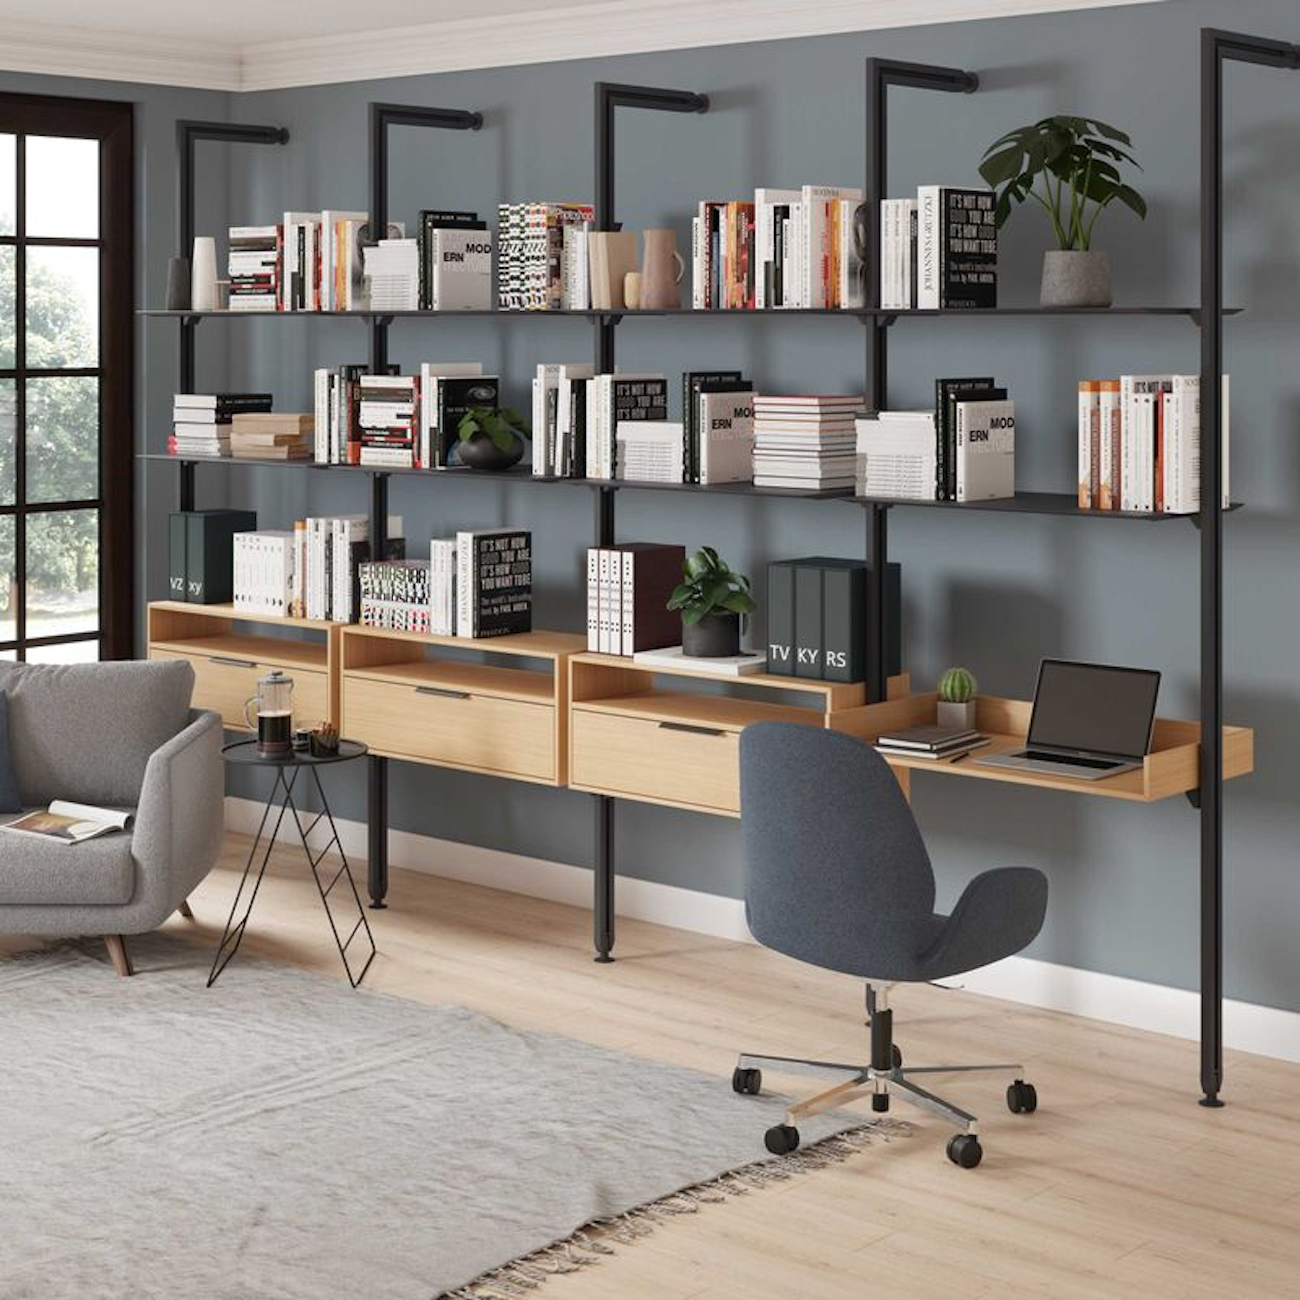 Creative Storage Solutions for Shared Workspaces